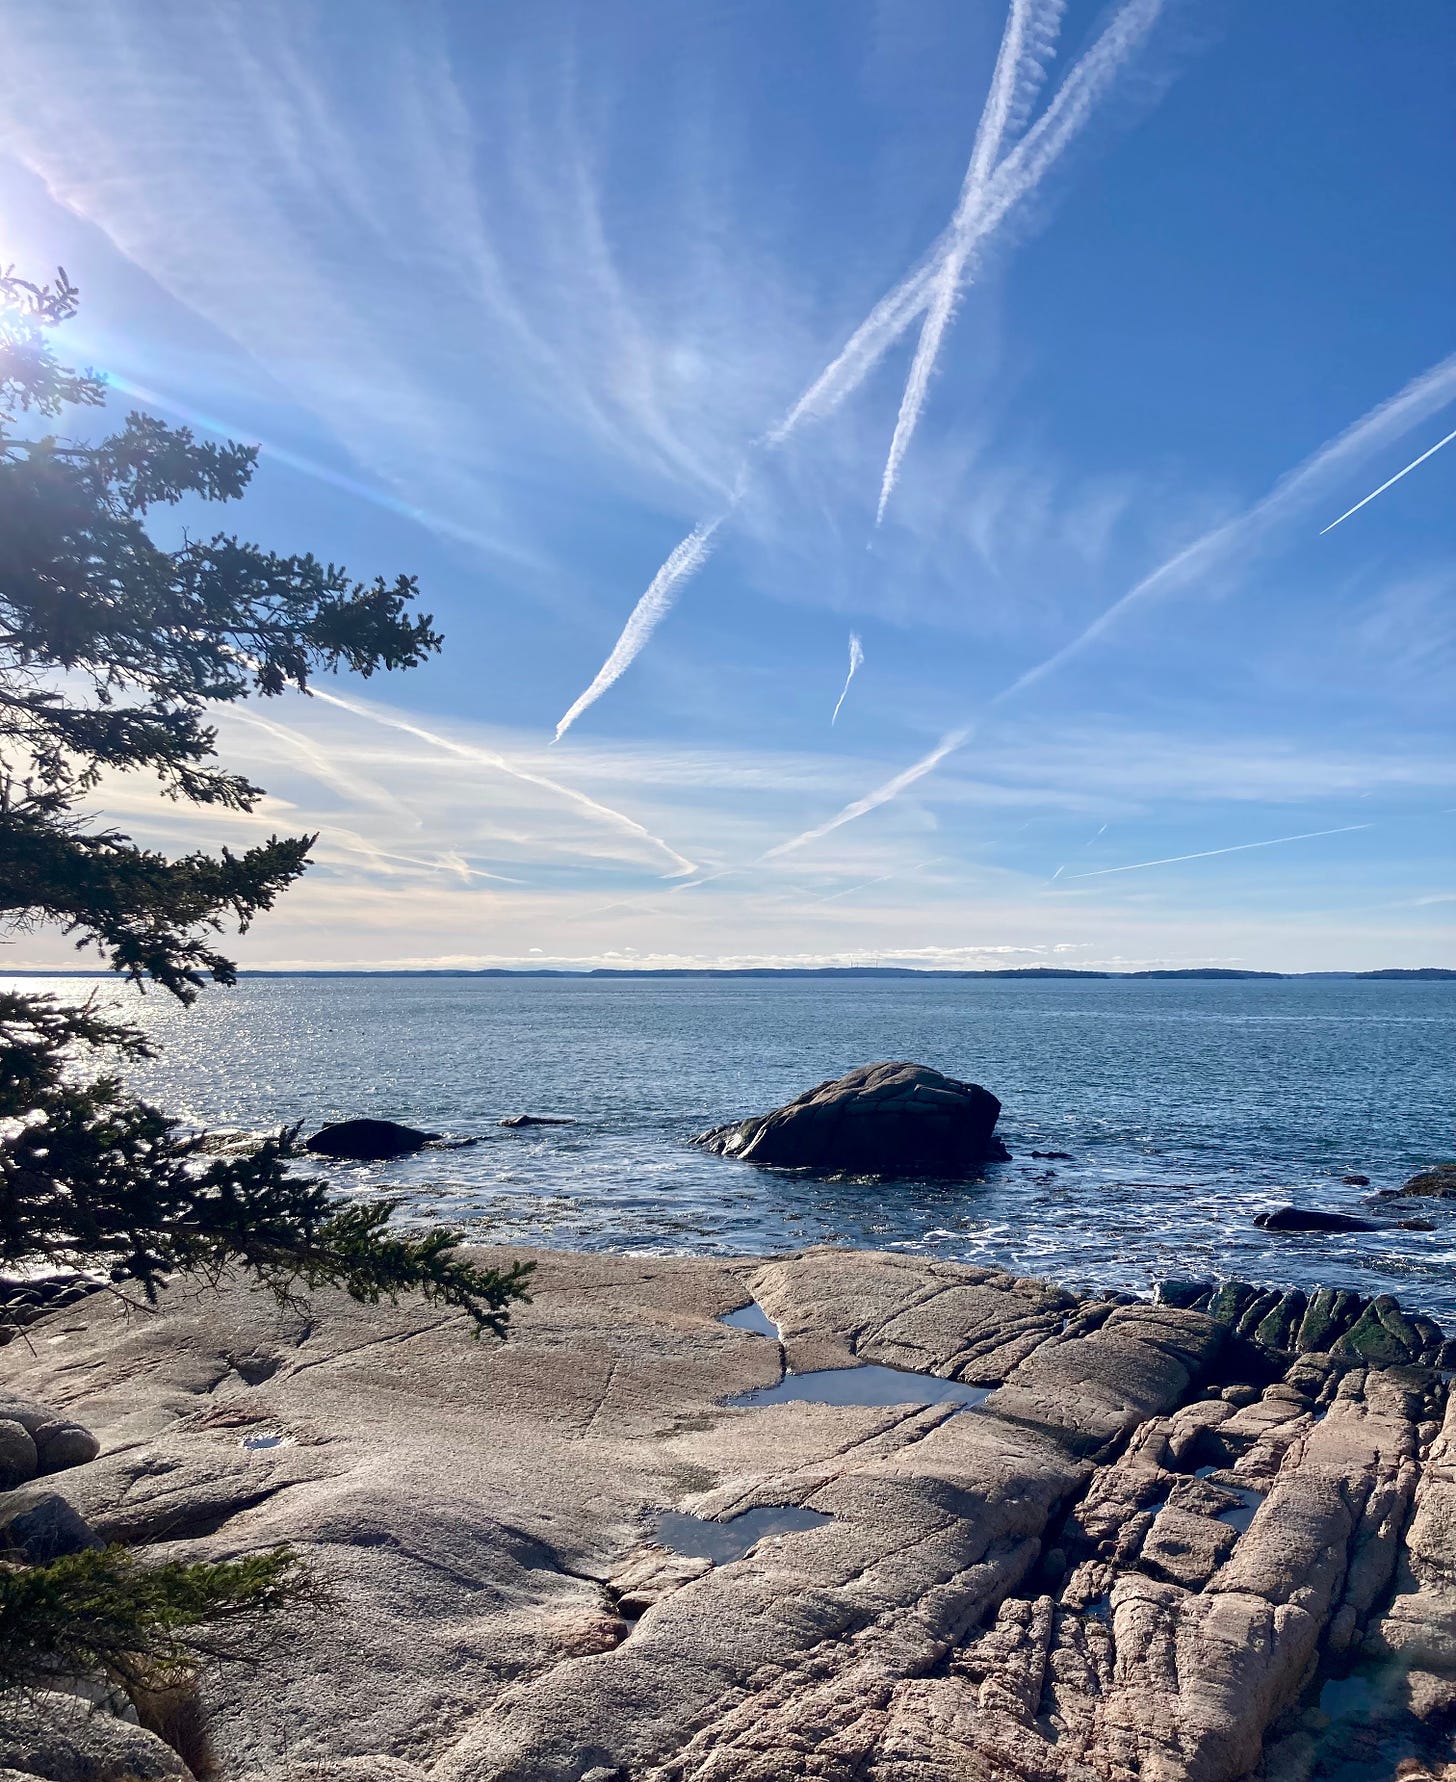 Ocean and sky, with a large granite rock and evergreen branches in the foreground. It is high tide and the water level is very high.